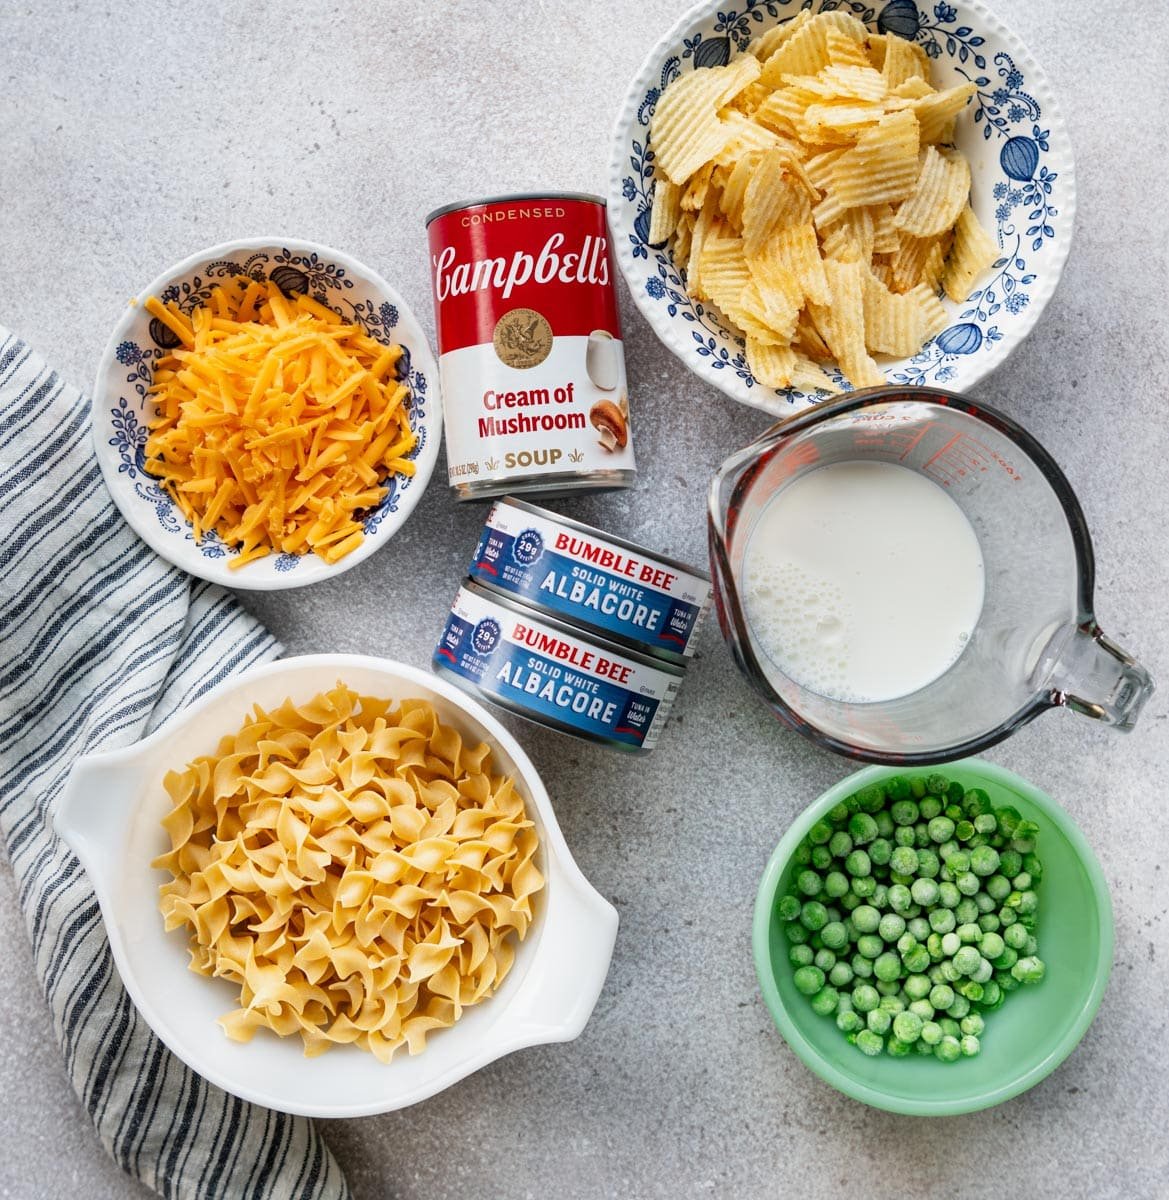 Ingredients for campbell's tuna noodle casserole recipe.